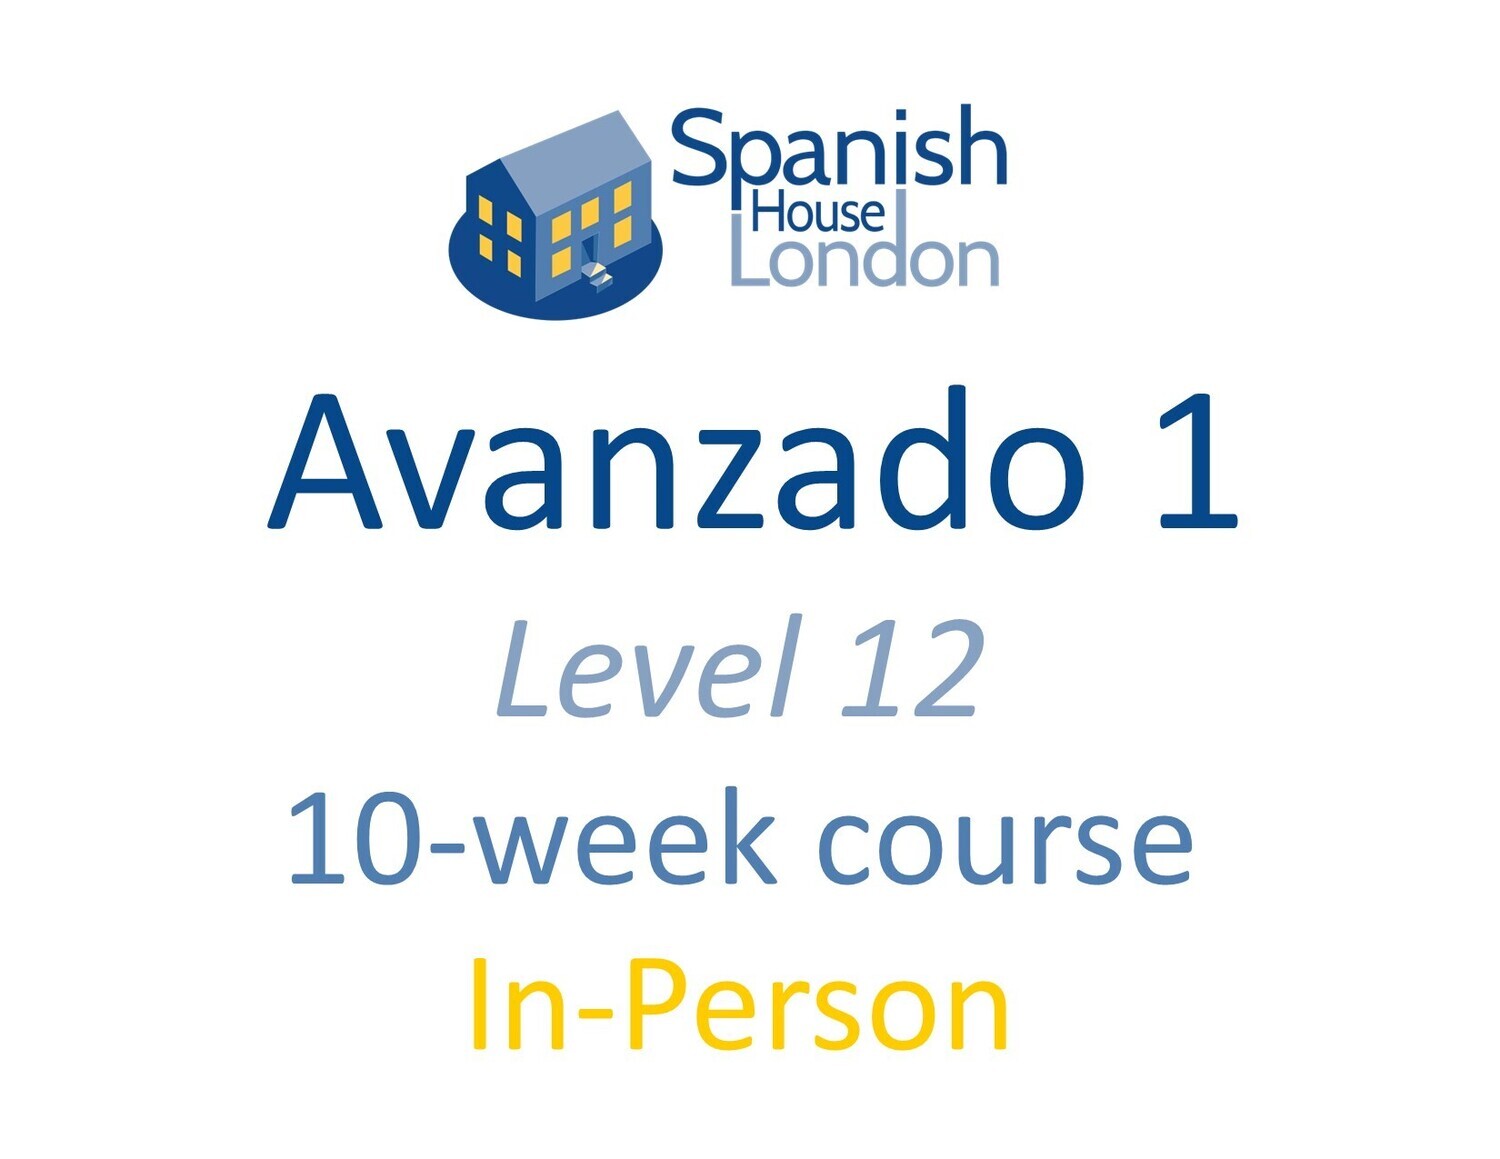 Avanzado 1 Course starting on 19th March at 7.30pm in Euston / King's Cross